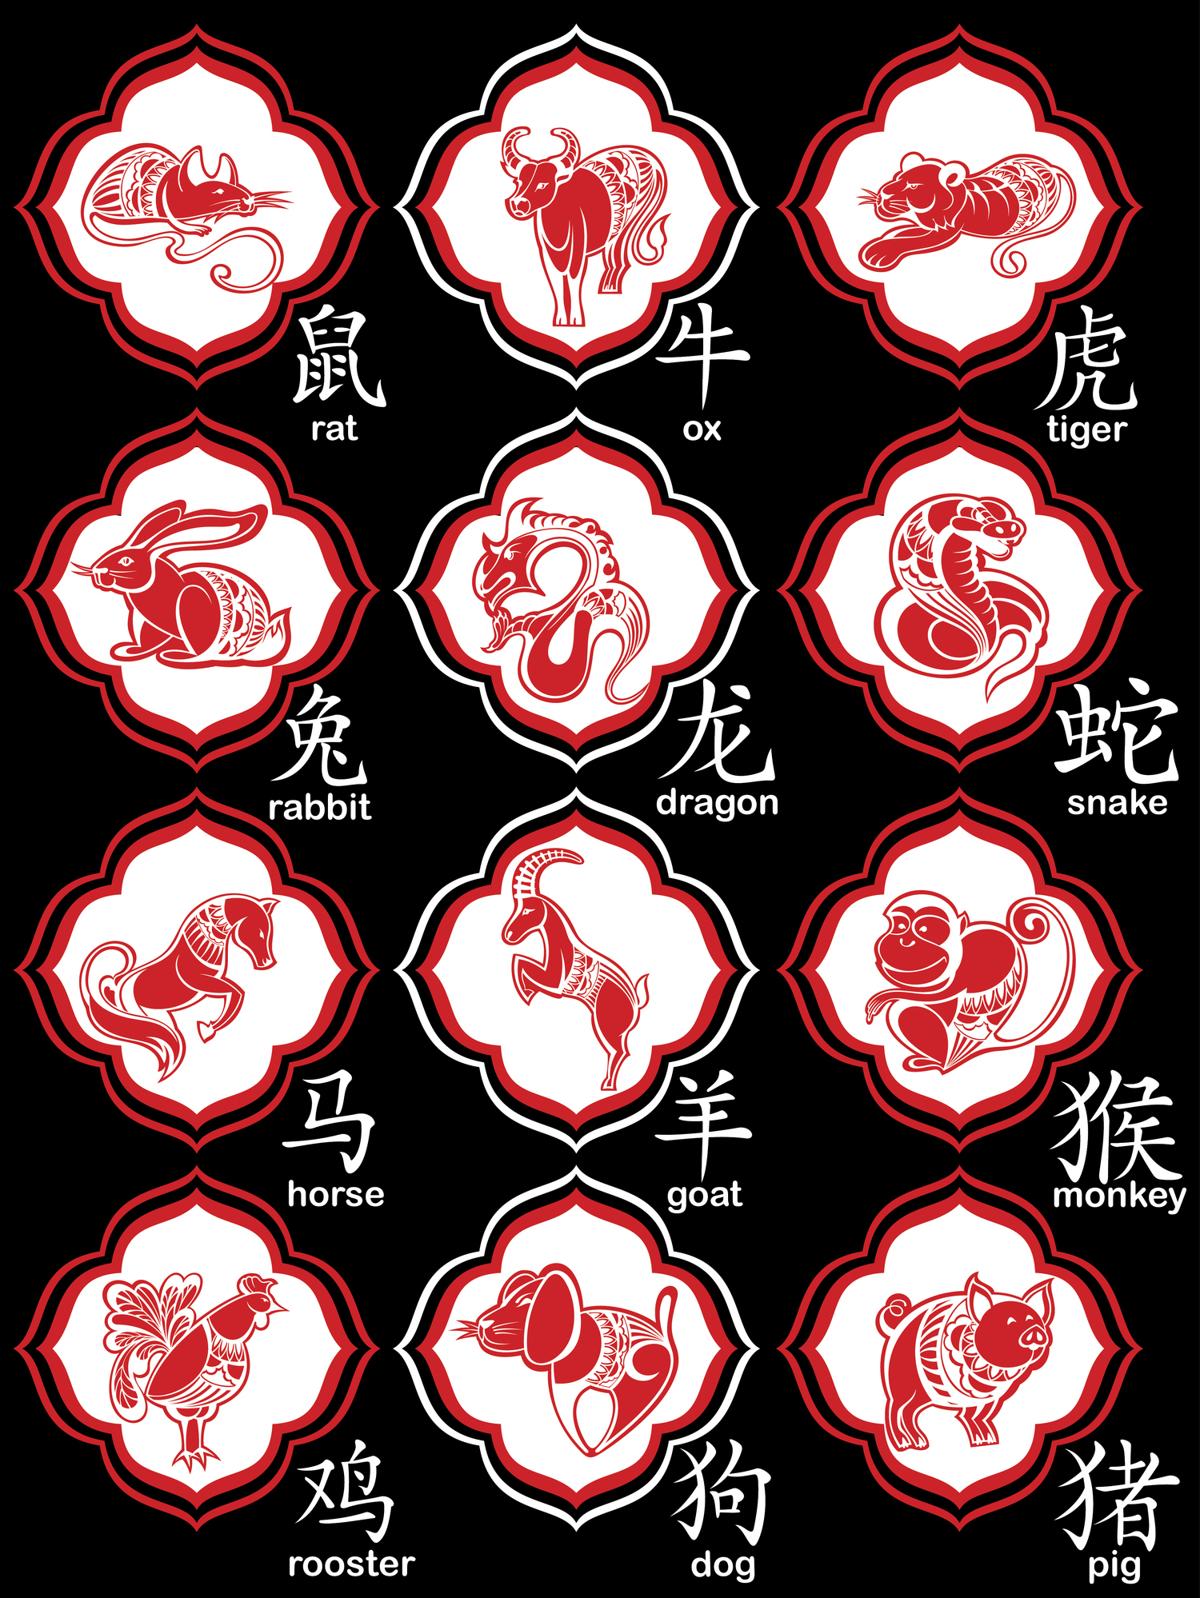 A Chart That Explains the Compatibility Between Chinese Zodiac Signs